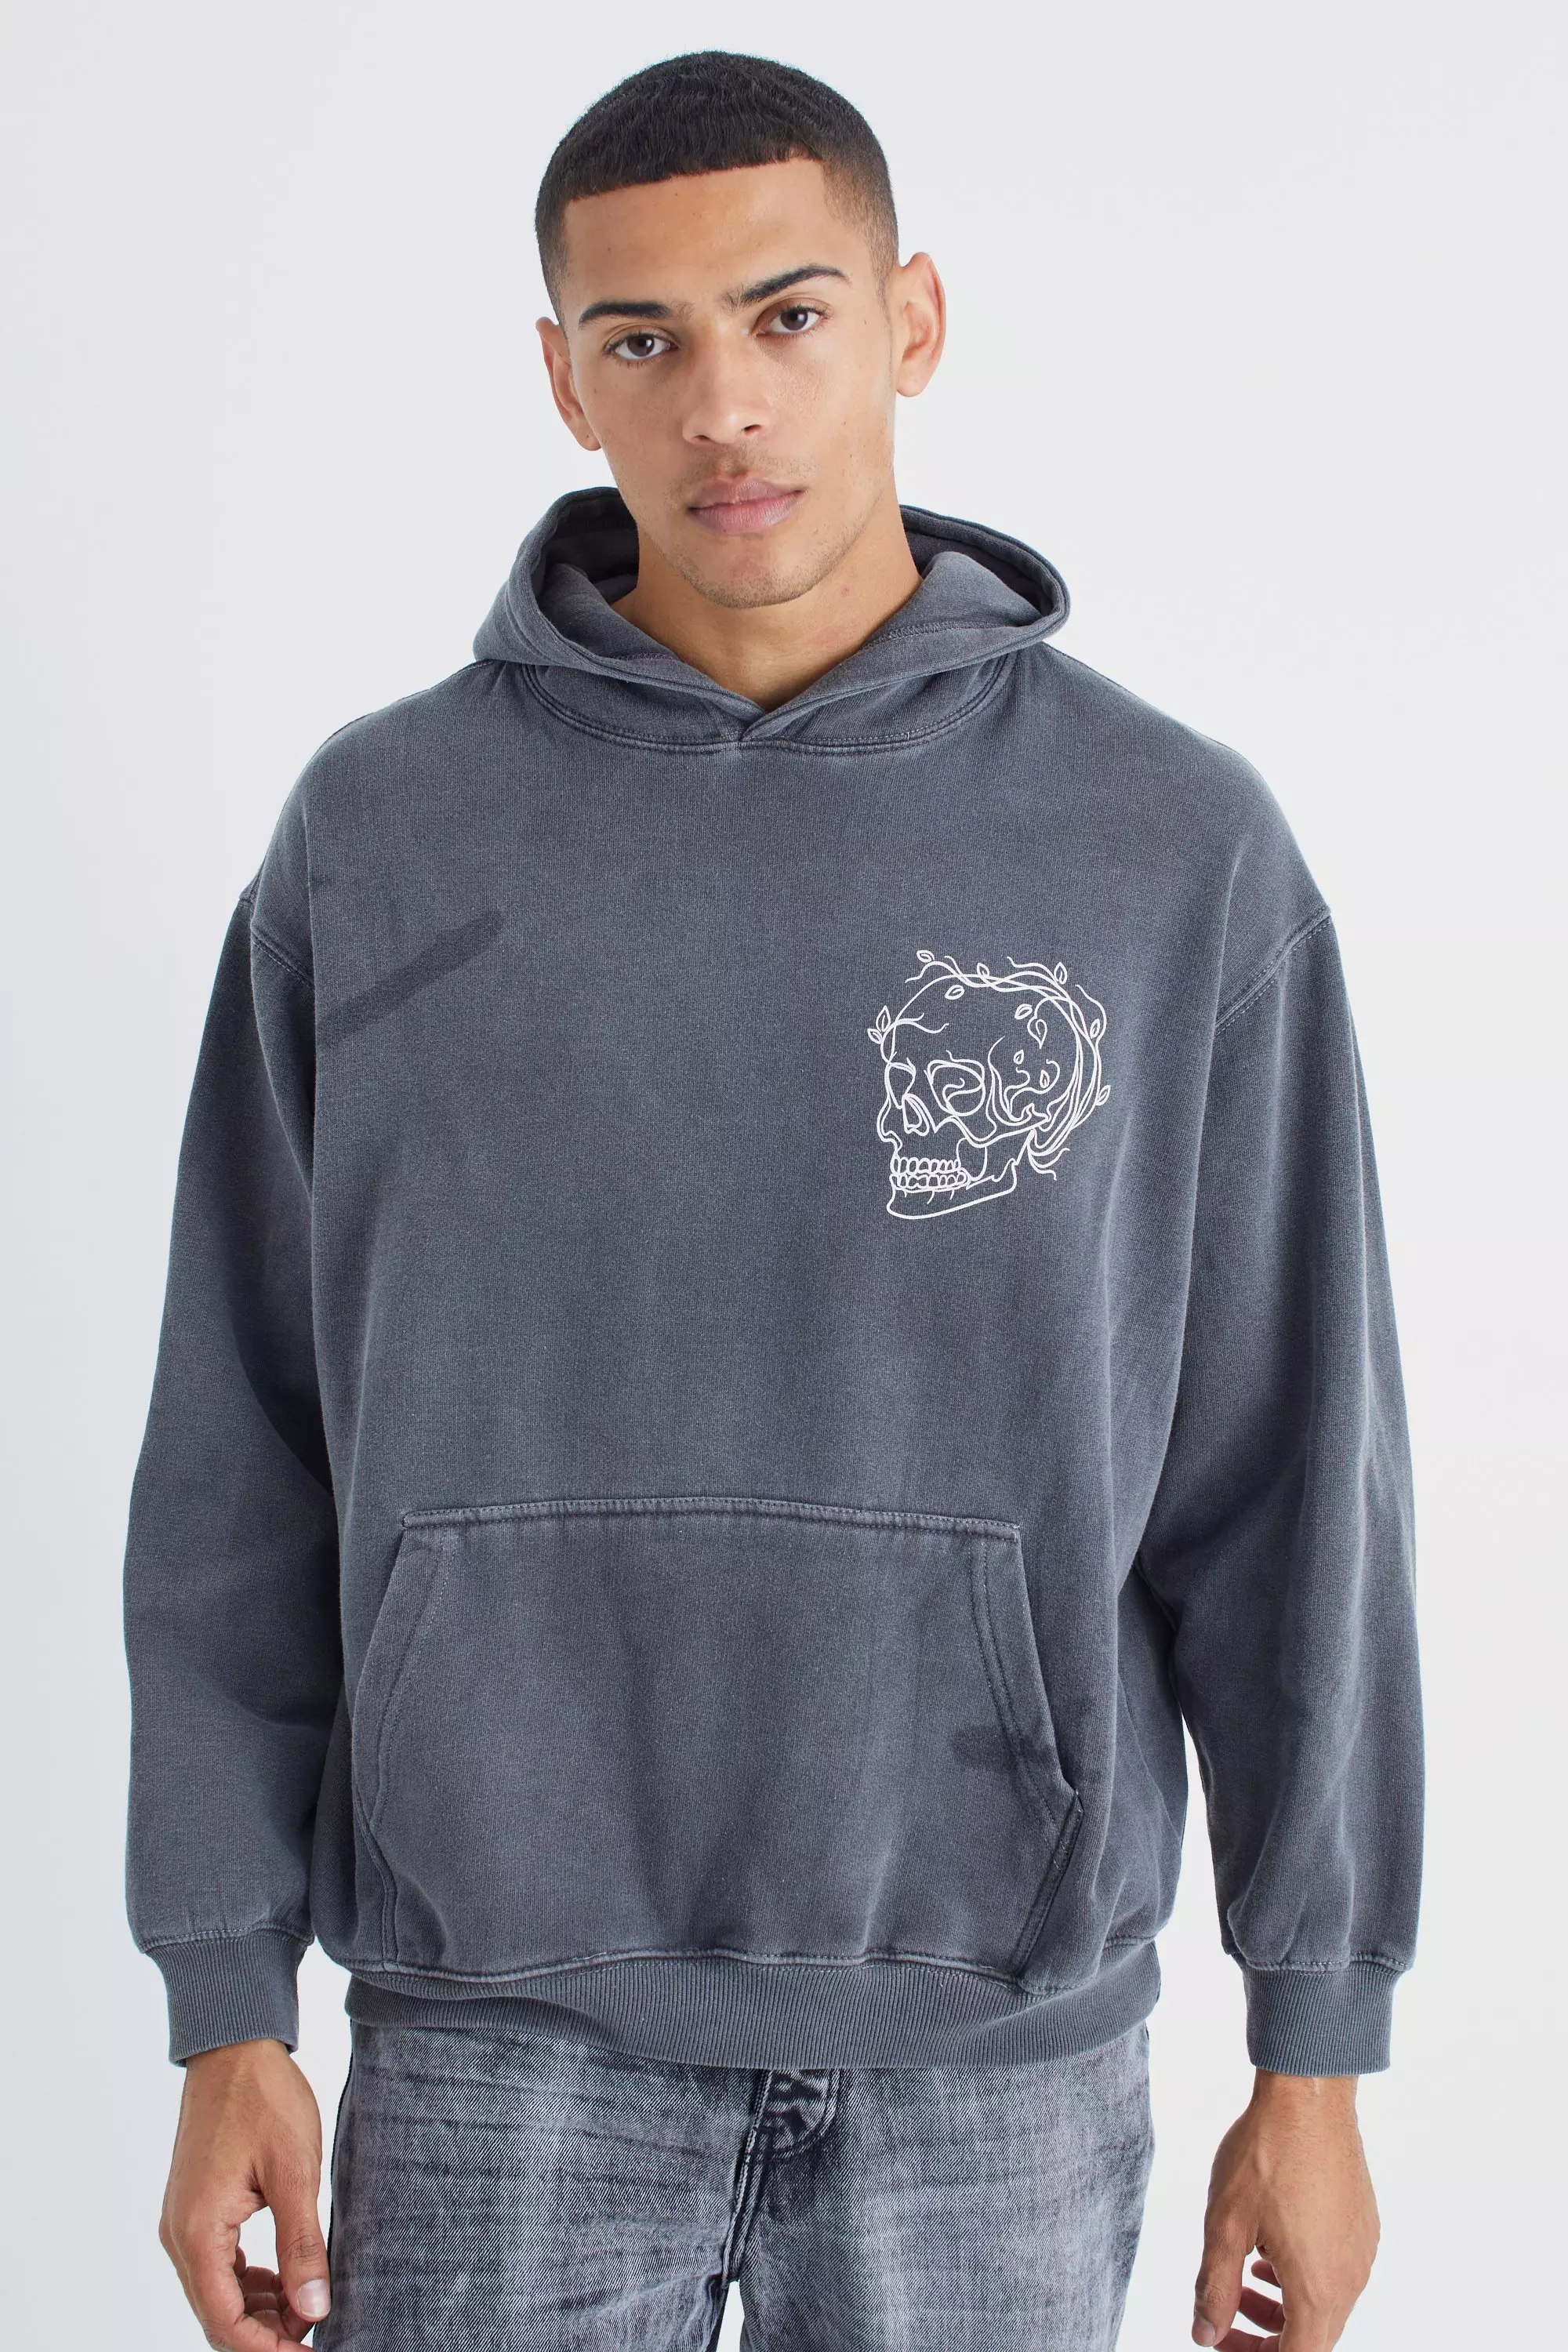 Charcoal Grey Oversized Overdye Stencil Graphic Hoodie